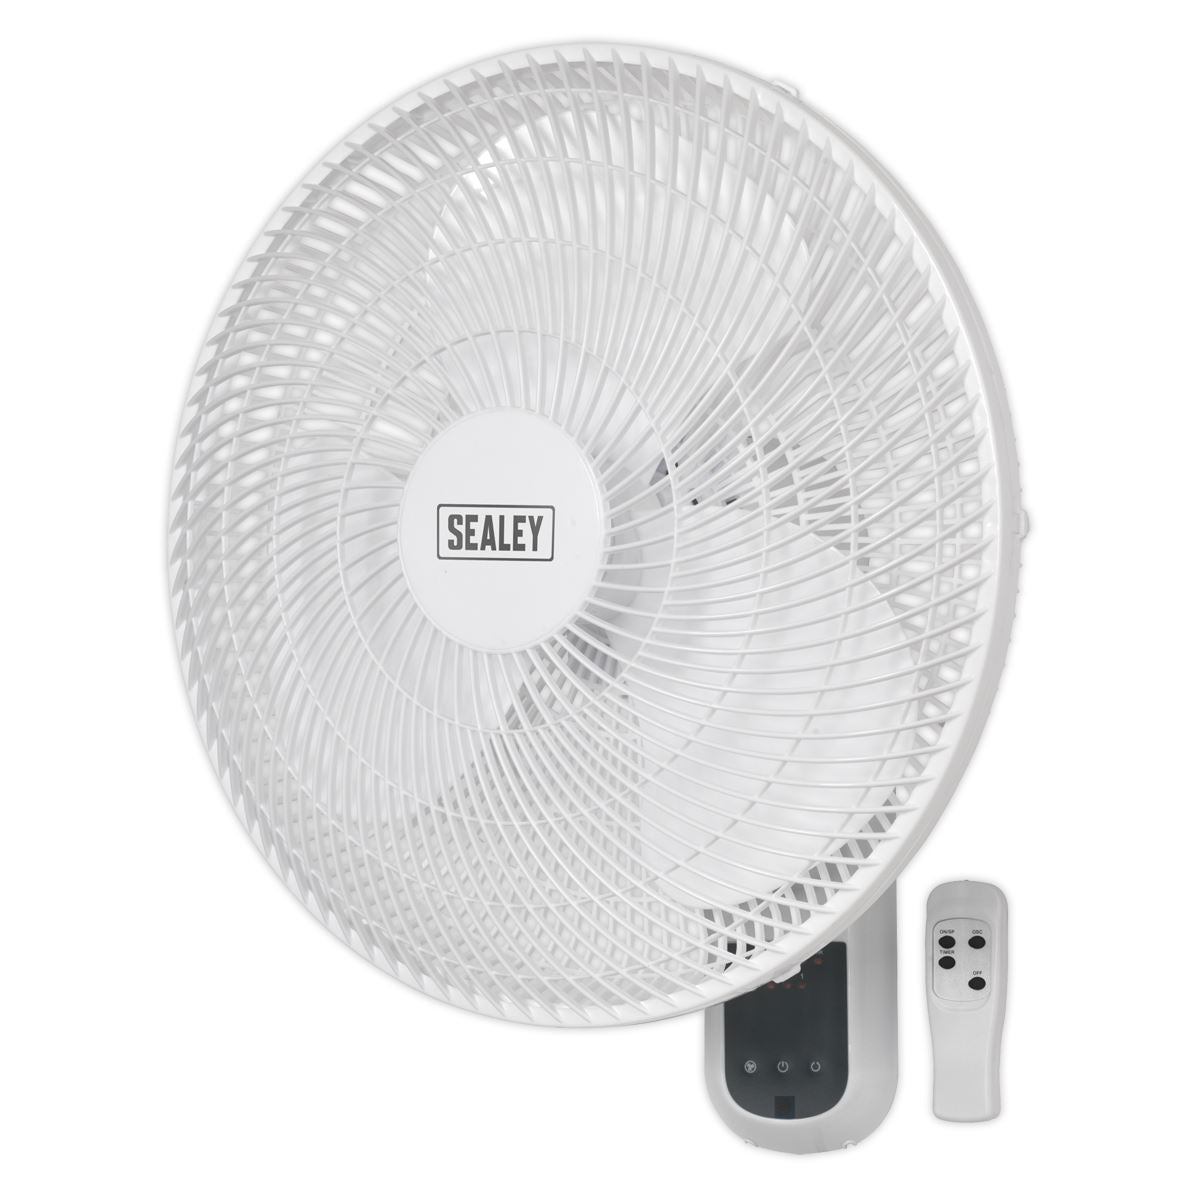 Sealey Wall Fan 3-Speed 16" with Remote Control 230V